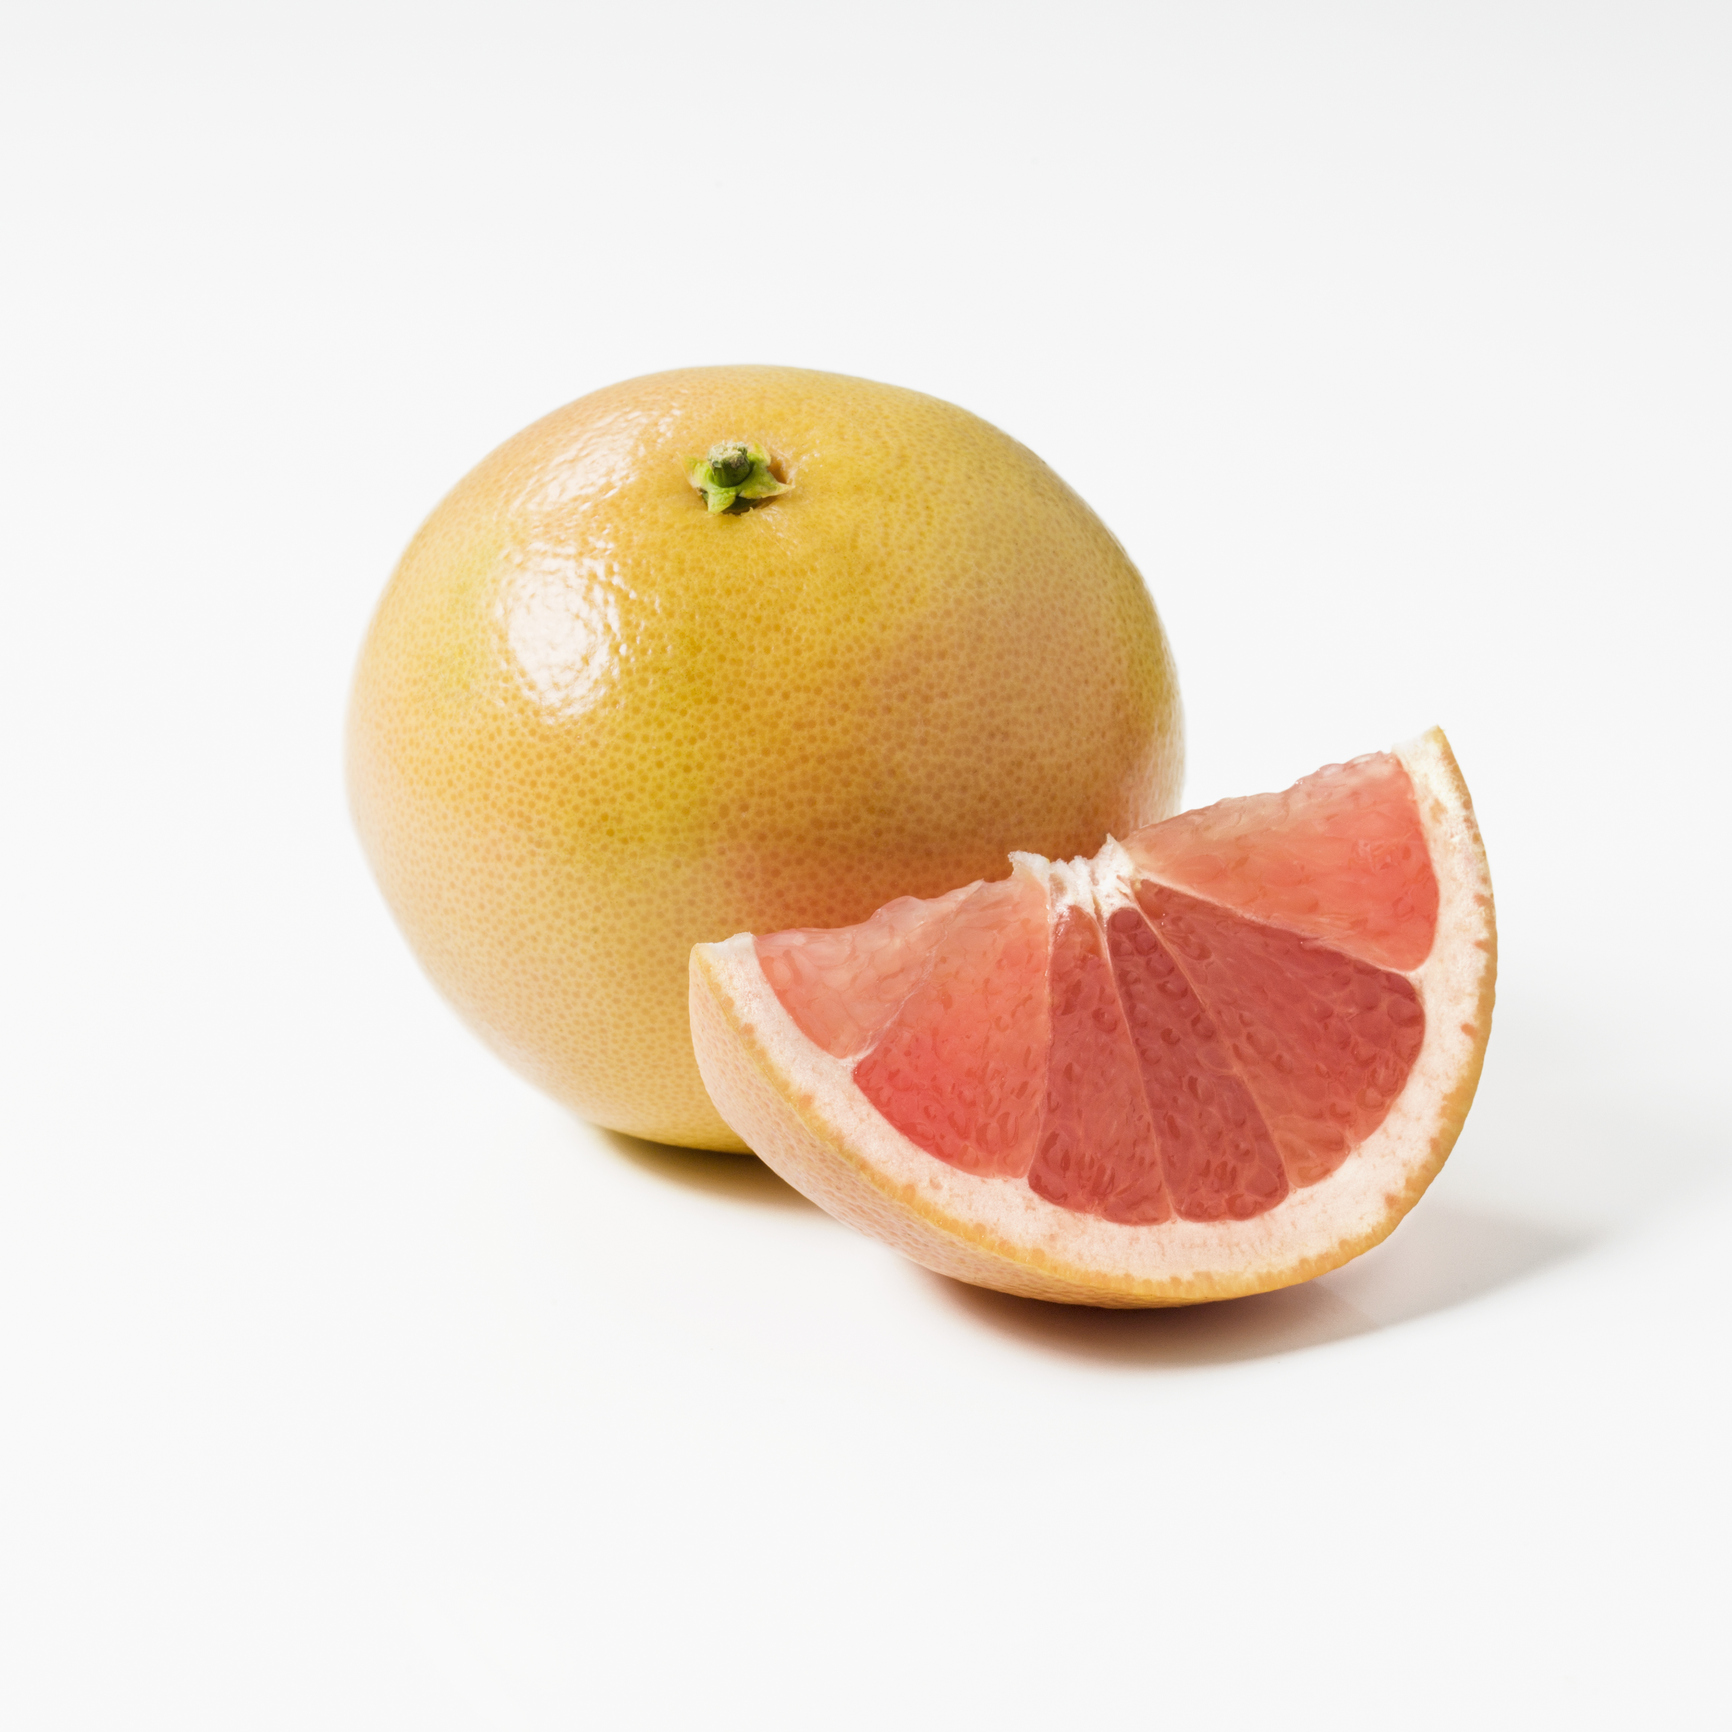 Whole grapefruit and a slice on a white background